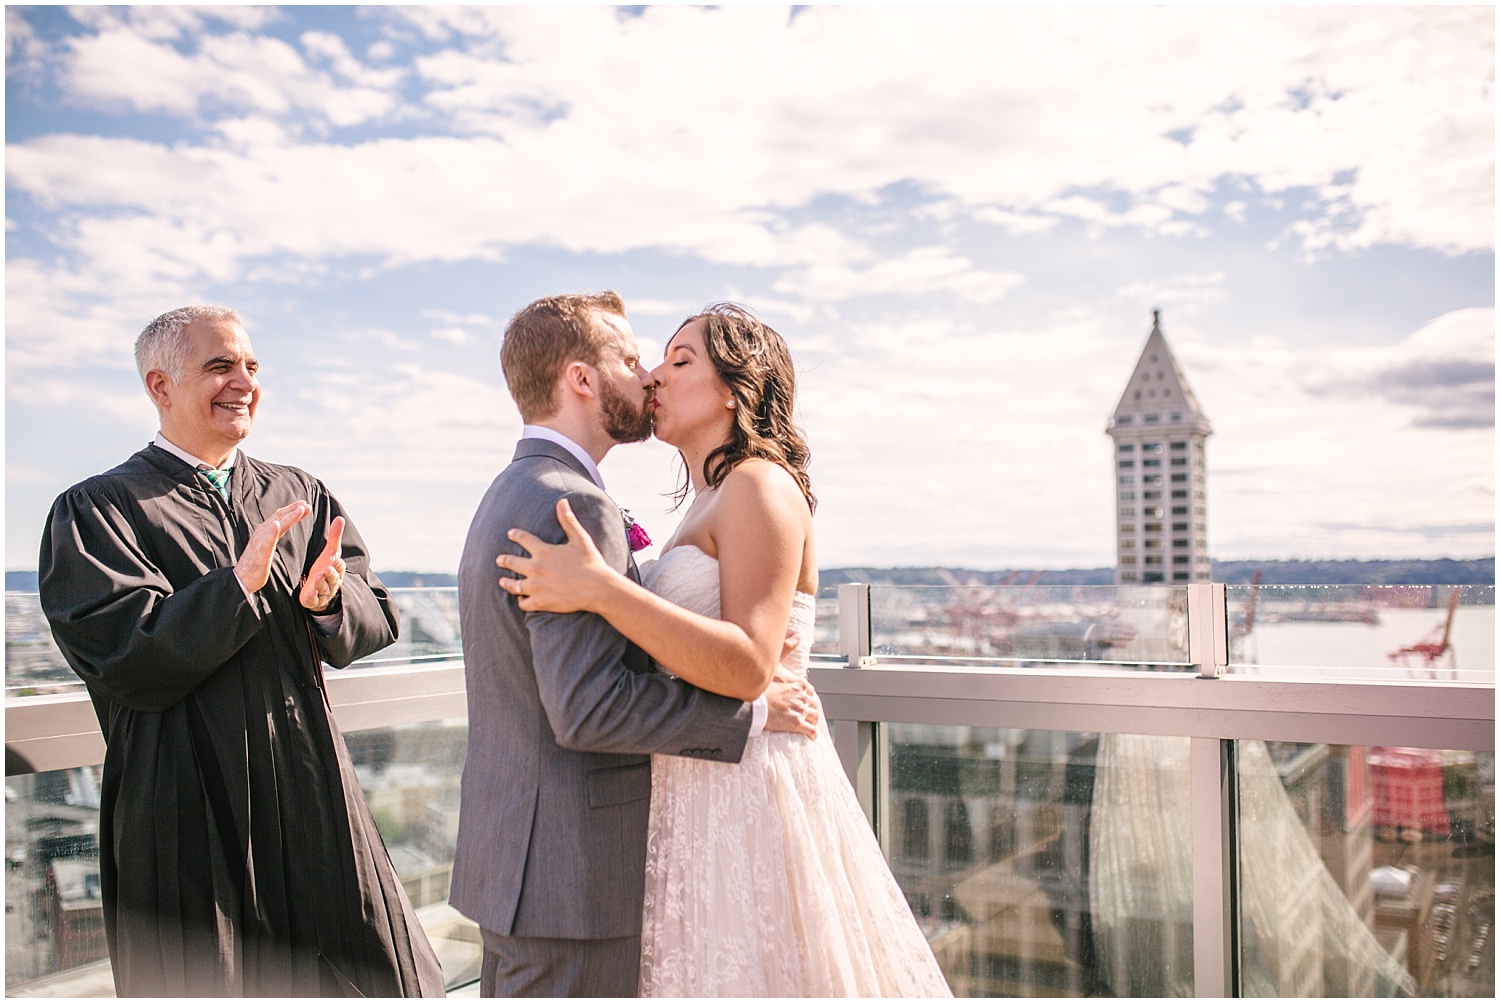 Bride and groom's first kiss at Seattle Municipal Court wedding ceremony on the rooftop.